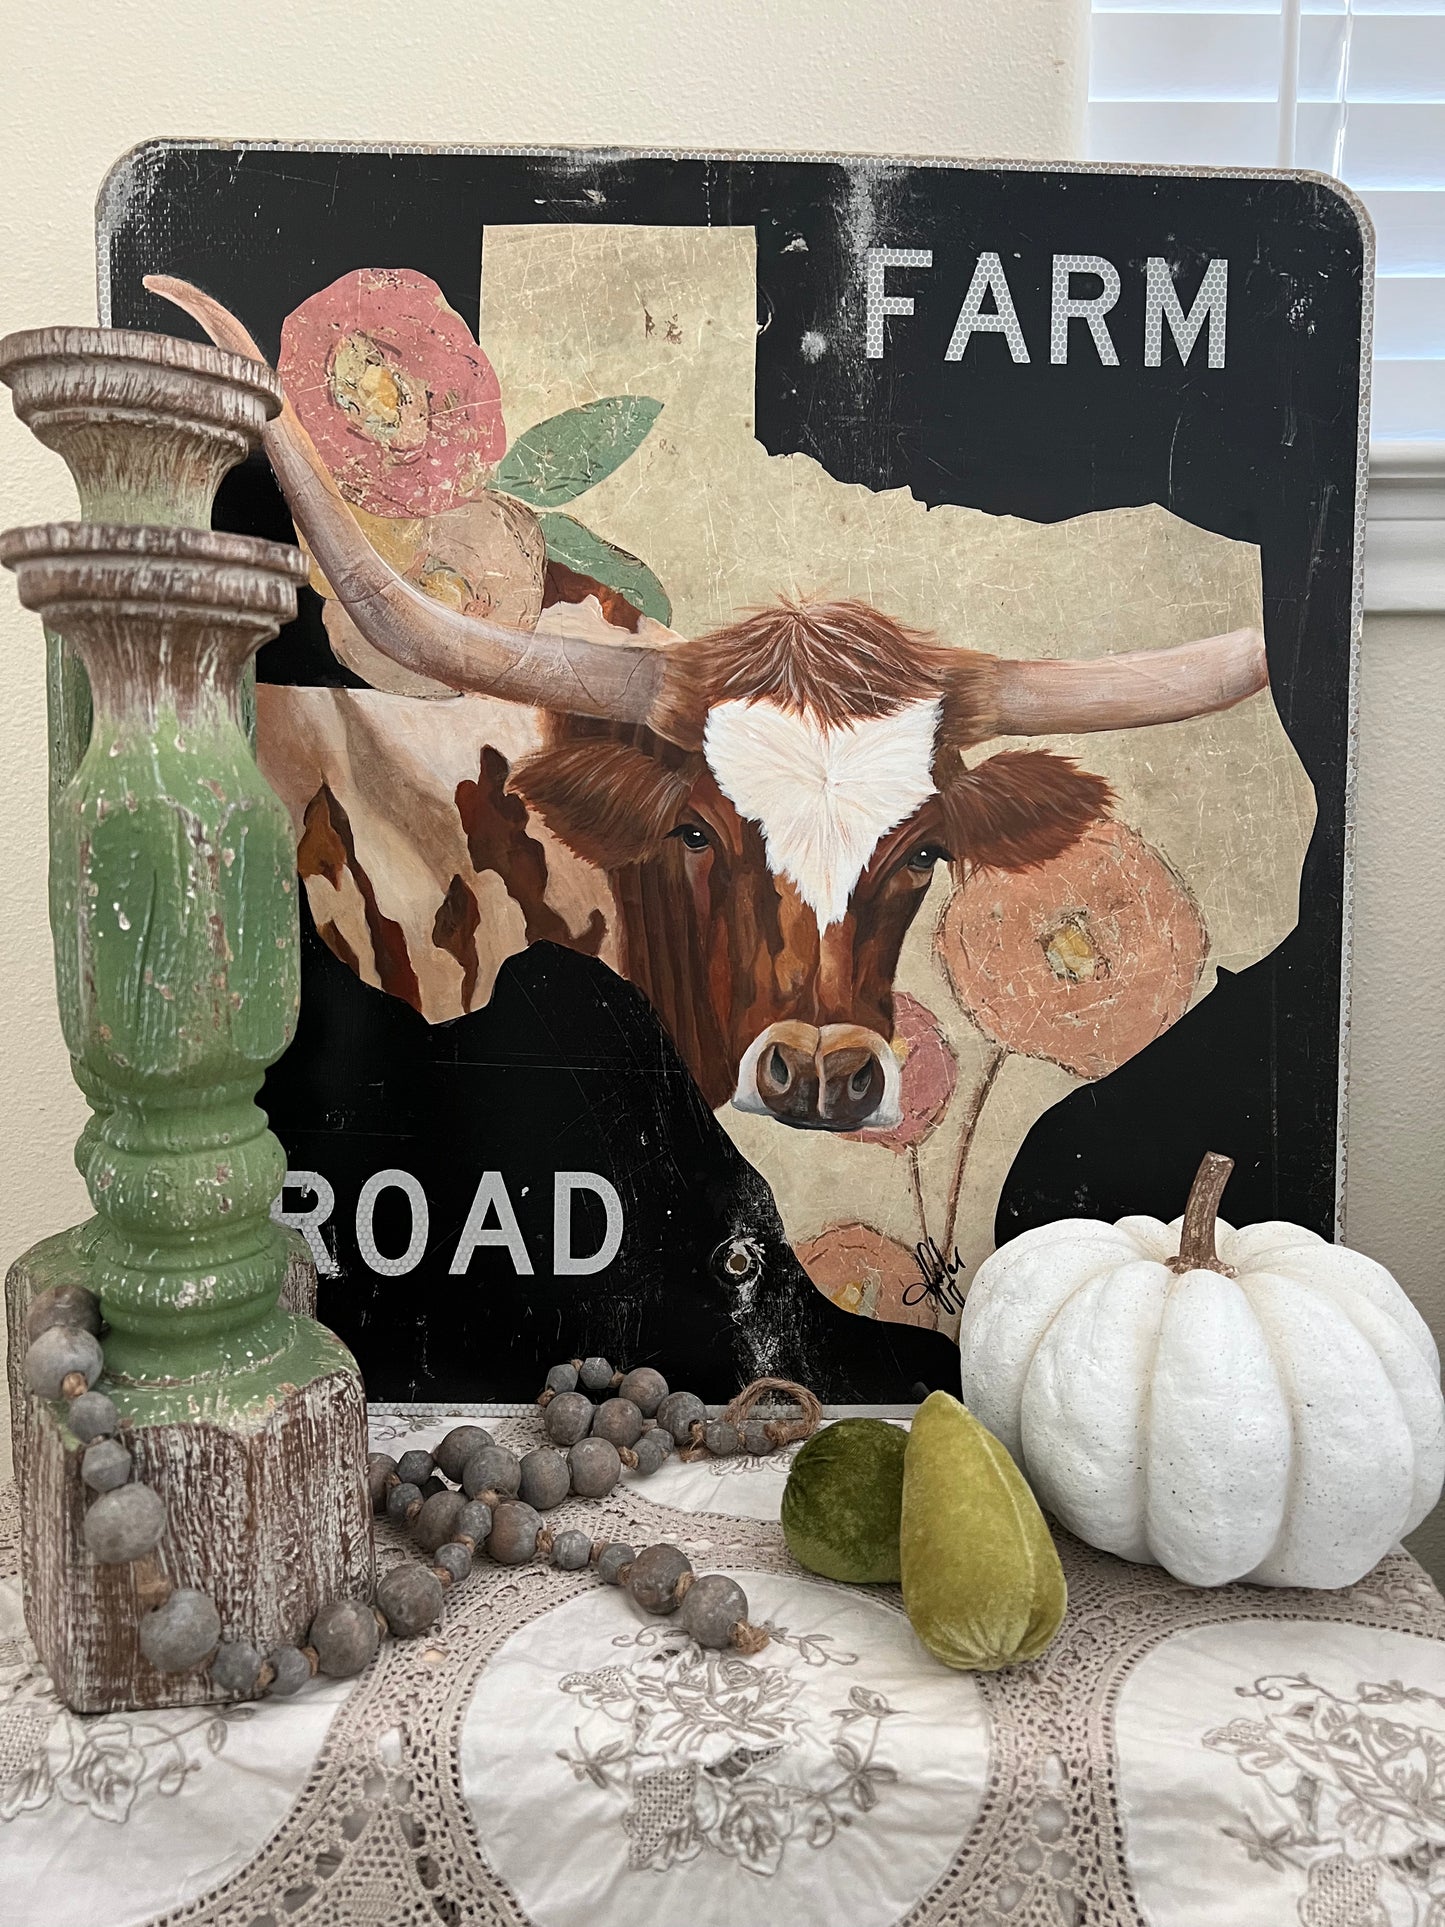 Original 24 X 24 Painting of Longhorn on Authentic Farm Road Sign.